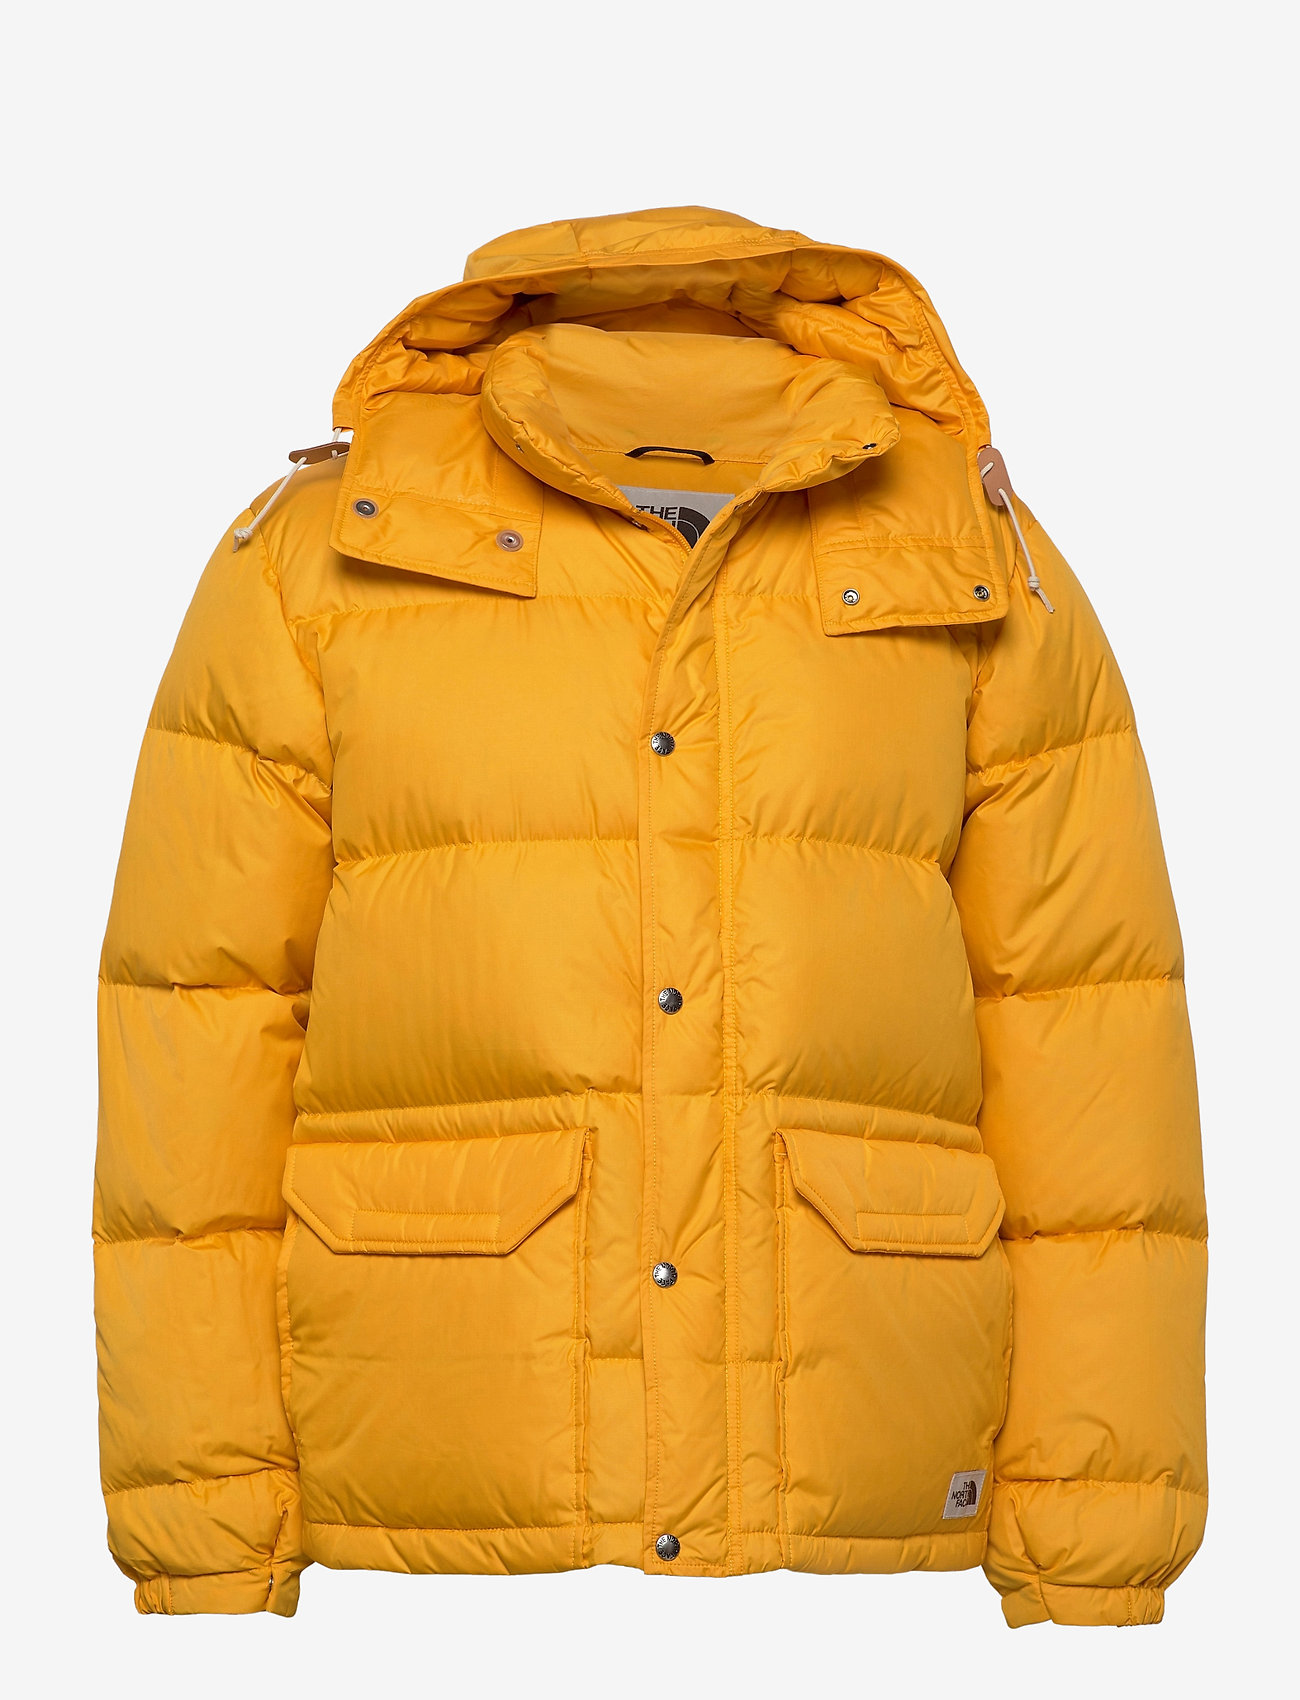 dry clean north face jacket